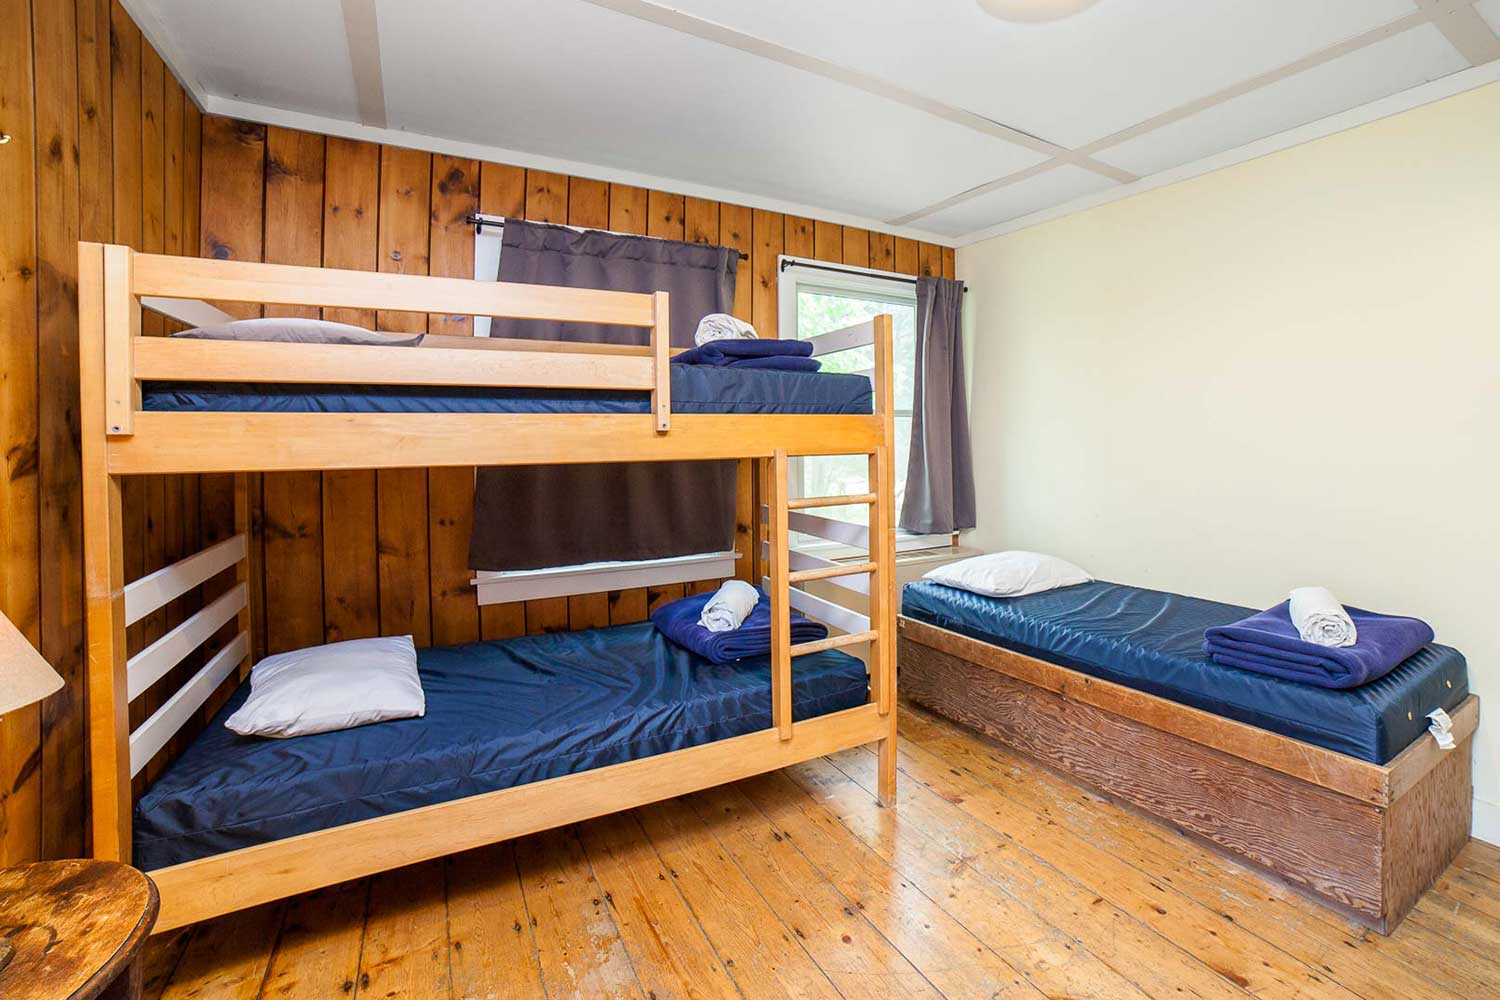 a bedroom at HI Martha's Vineyard hostel with hardwood floors and wood wall paneling, one set of twin-sized bunk beds, and one single twin-sized bed.